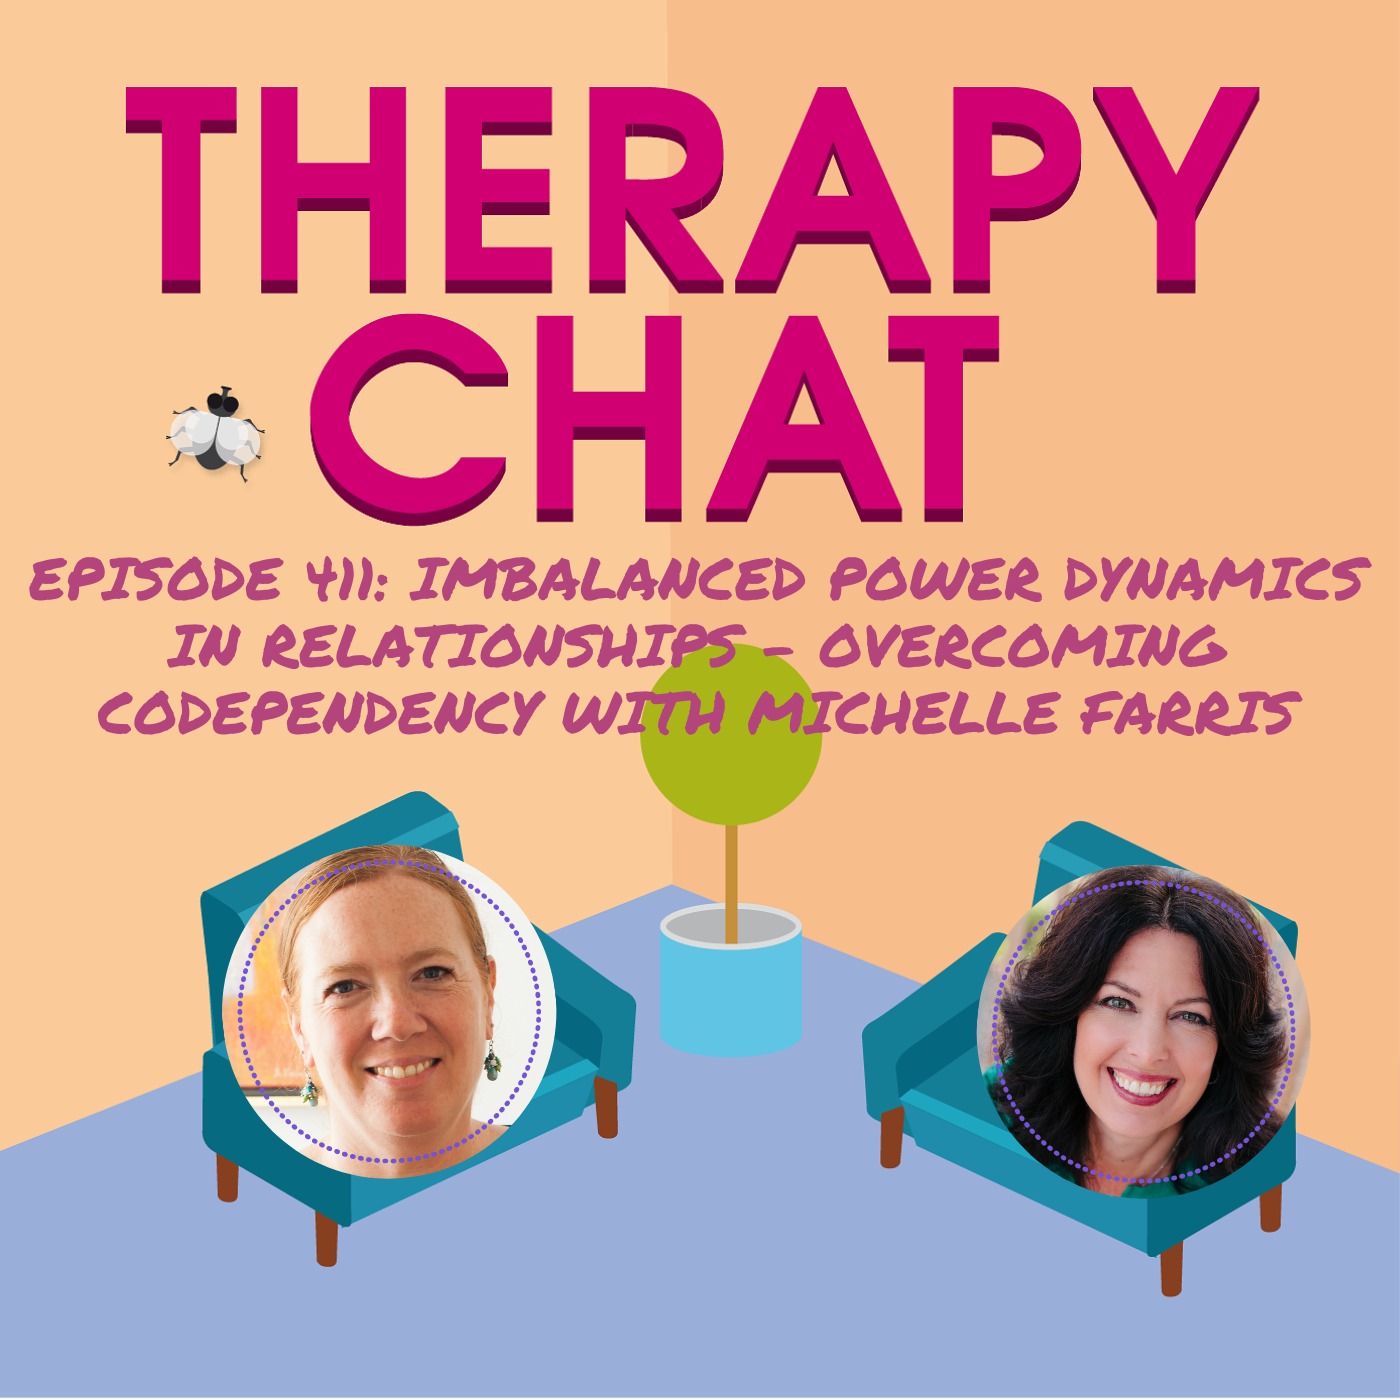 411: Imbalanced Power Dynamics In Relationships - Overcoming Codependency With Michelle Farris